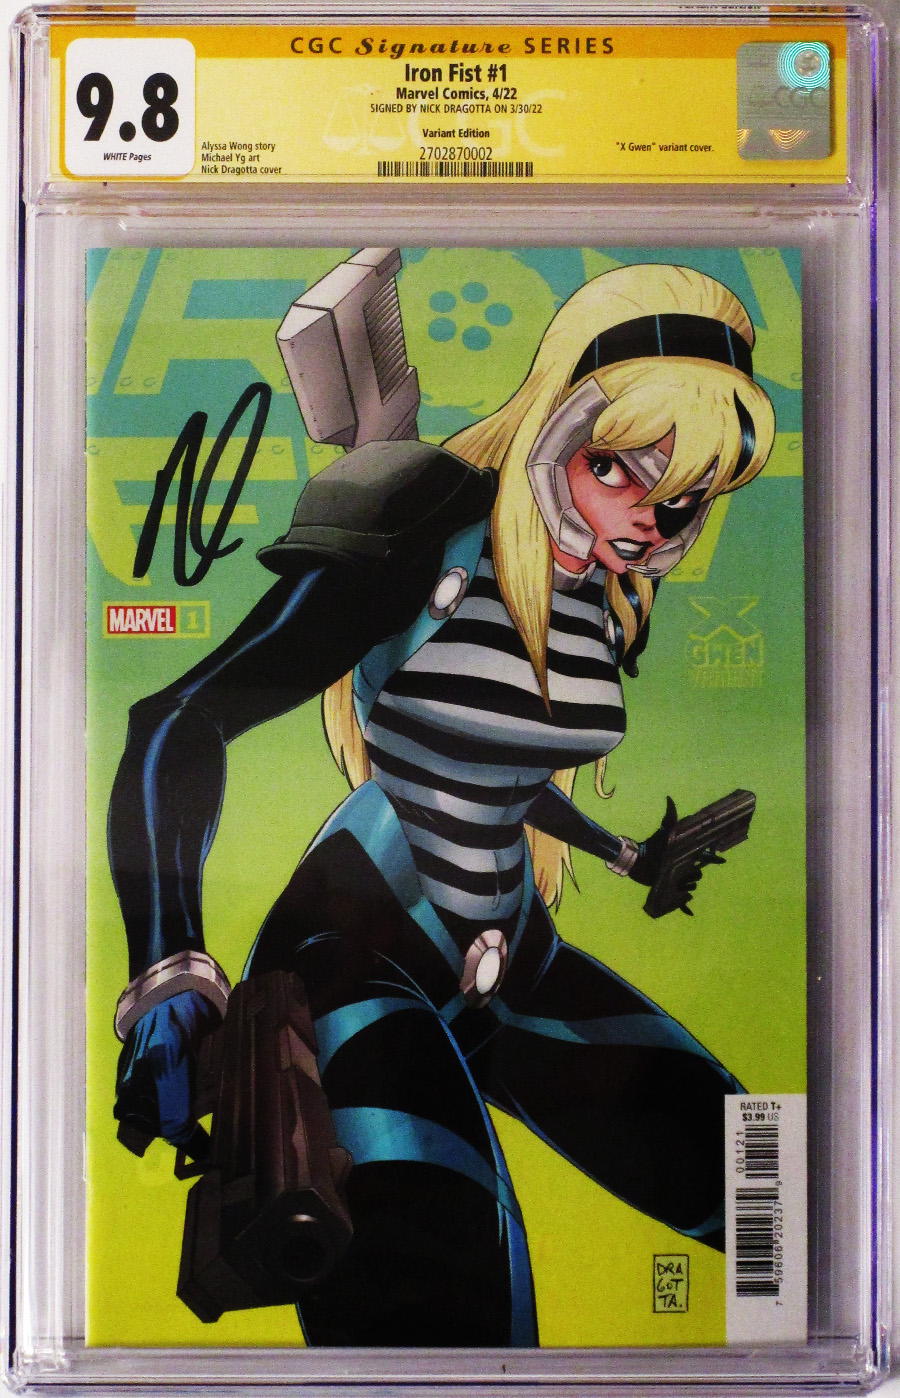 Iron Fist Vol 6 #1 Cover I Variant Nick Dragotta X-Gwen Cover Signed By Nick Dragotta CGC 9.8